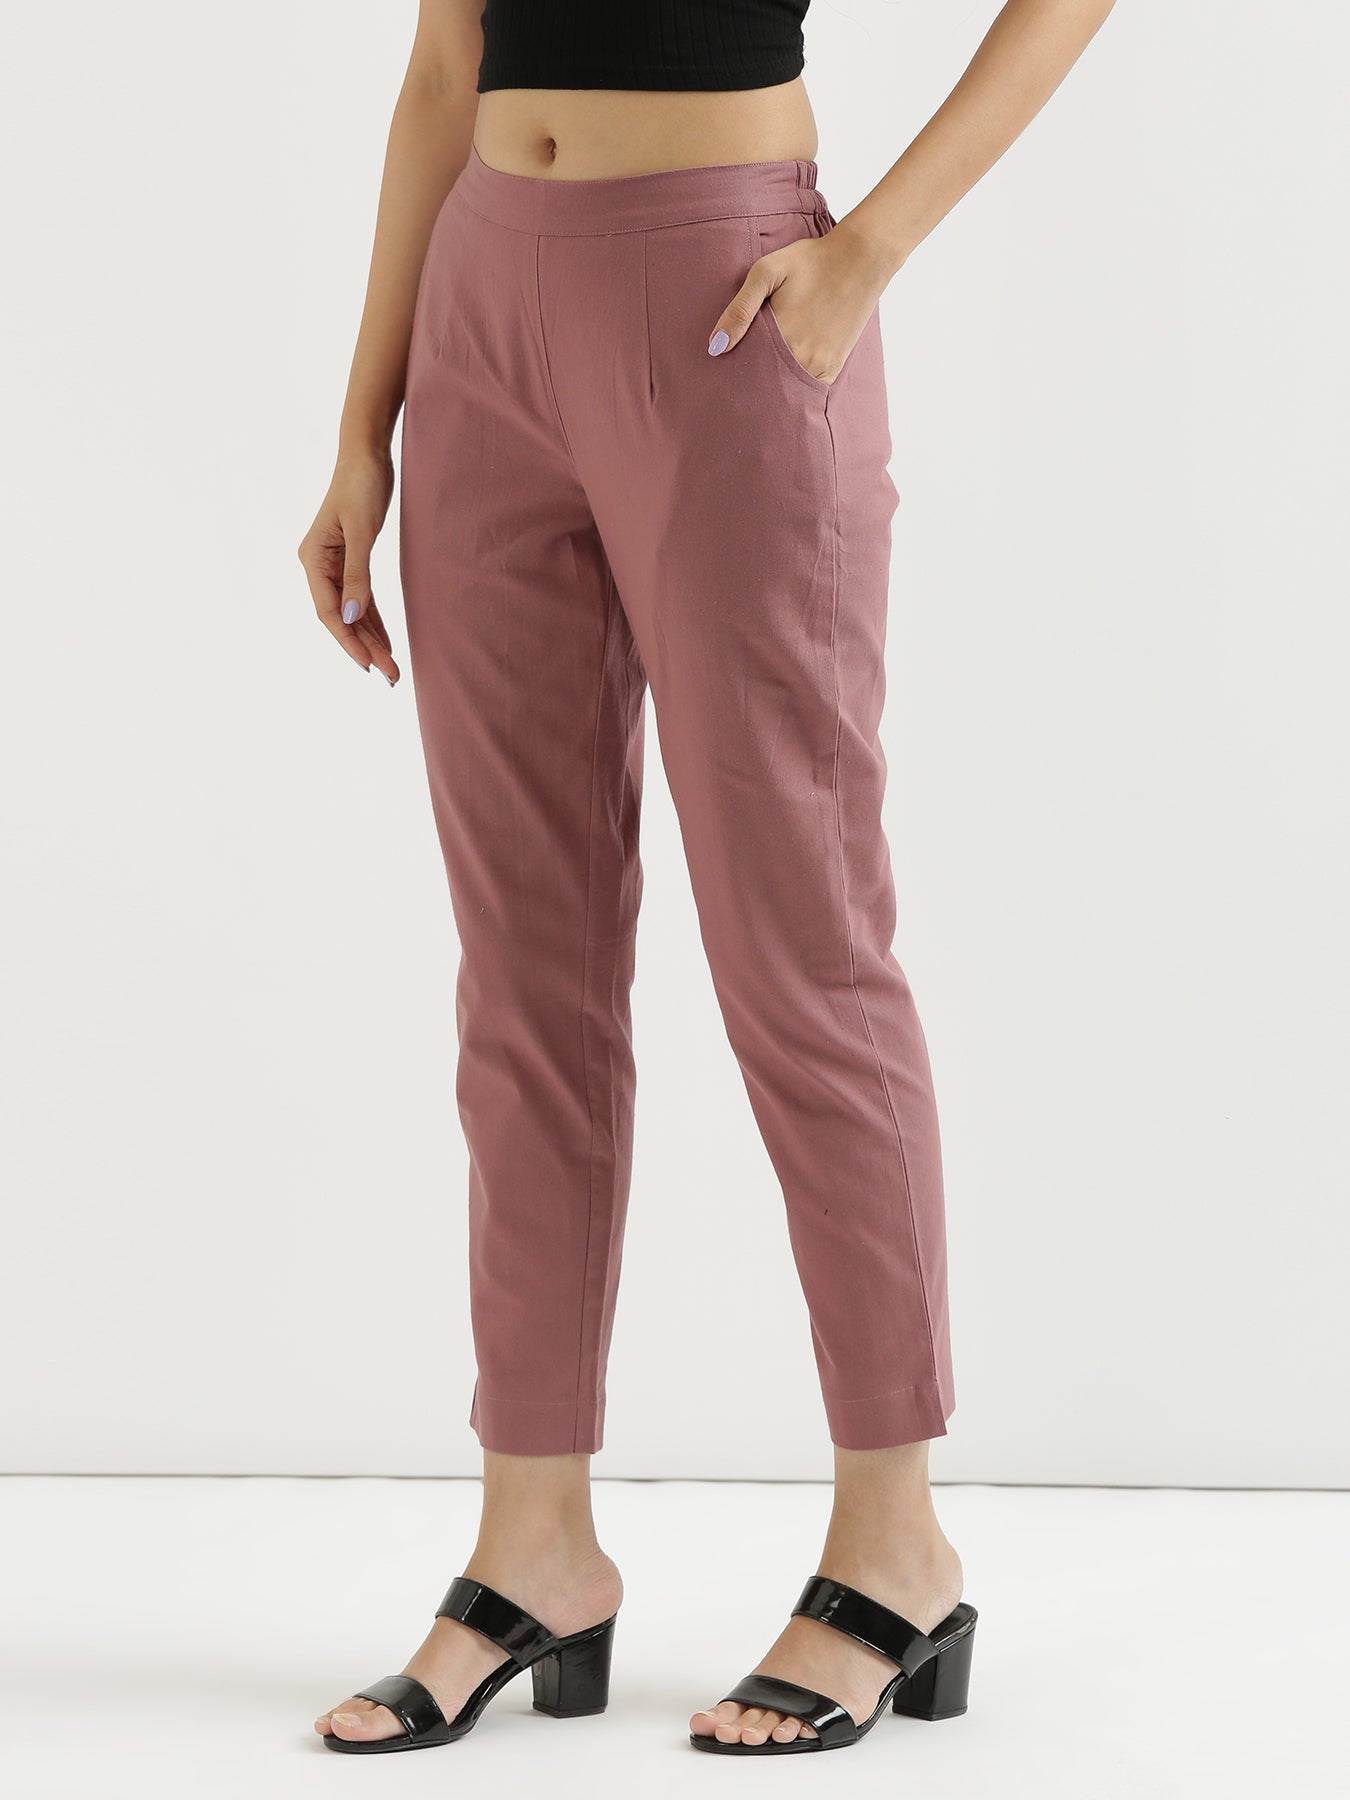 Buy Gray Sky Blue Trouser Cotton Pants for Best Price, Reviews, Free  Shipping